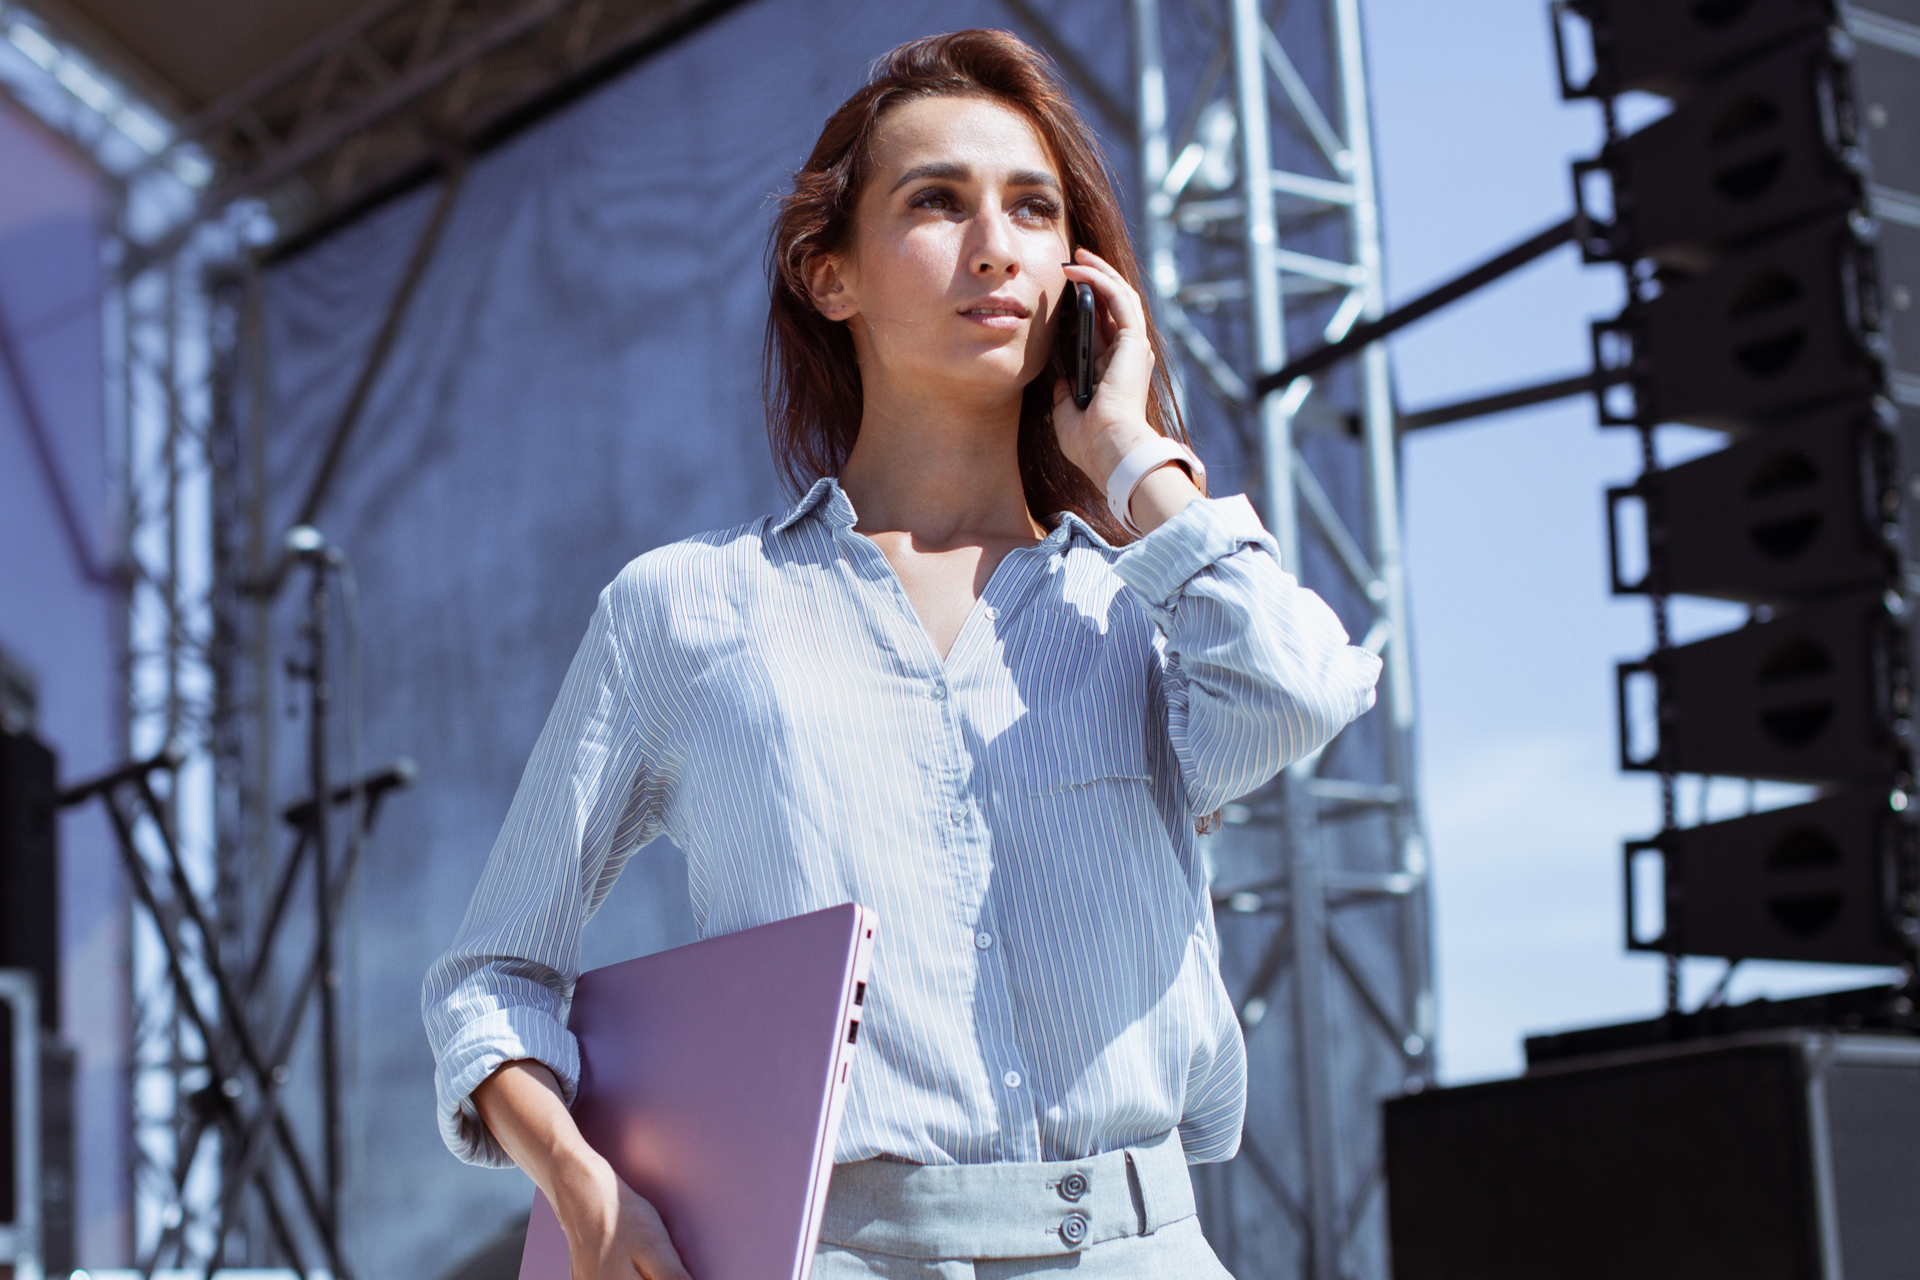 You woman standing in front of a stage speaking on a phone at a open air live event